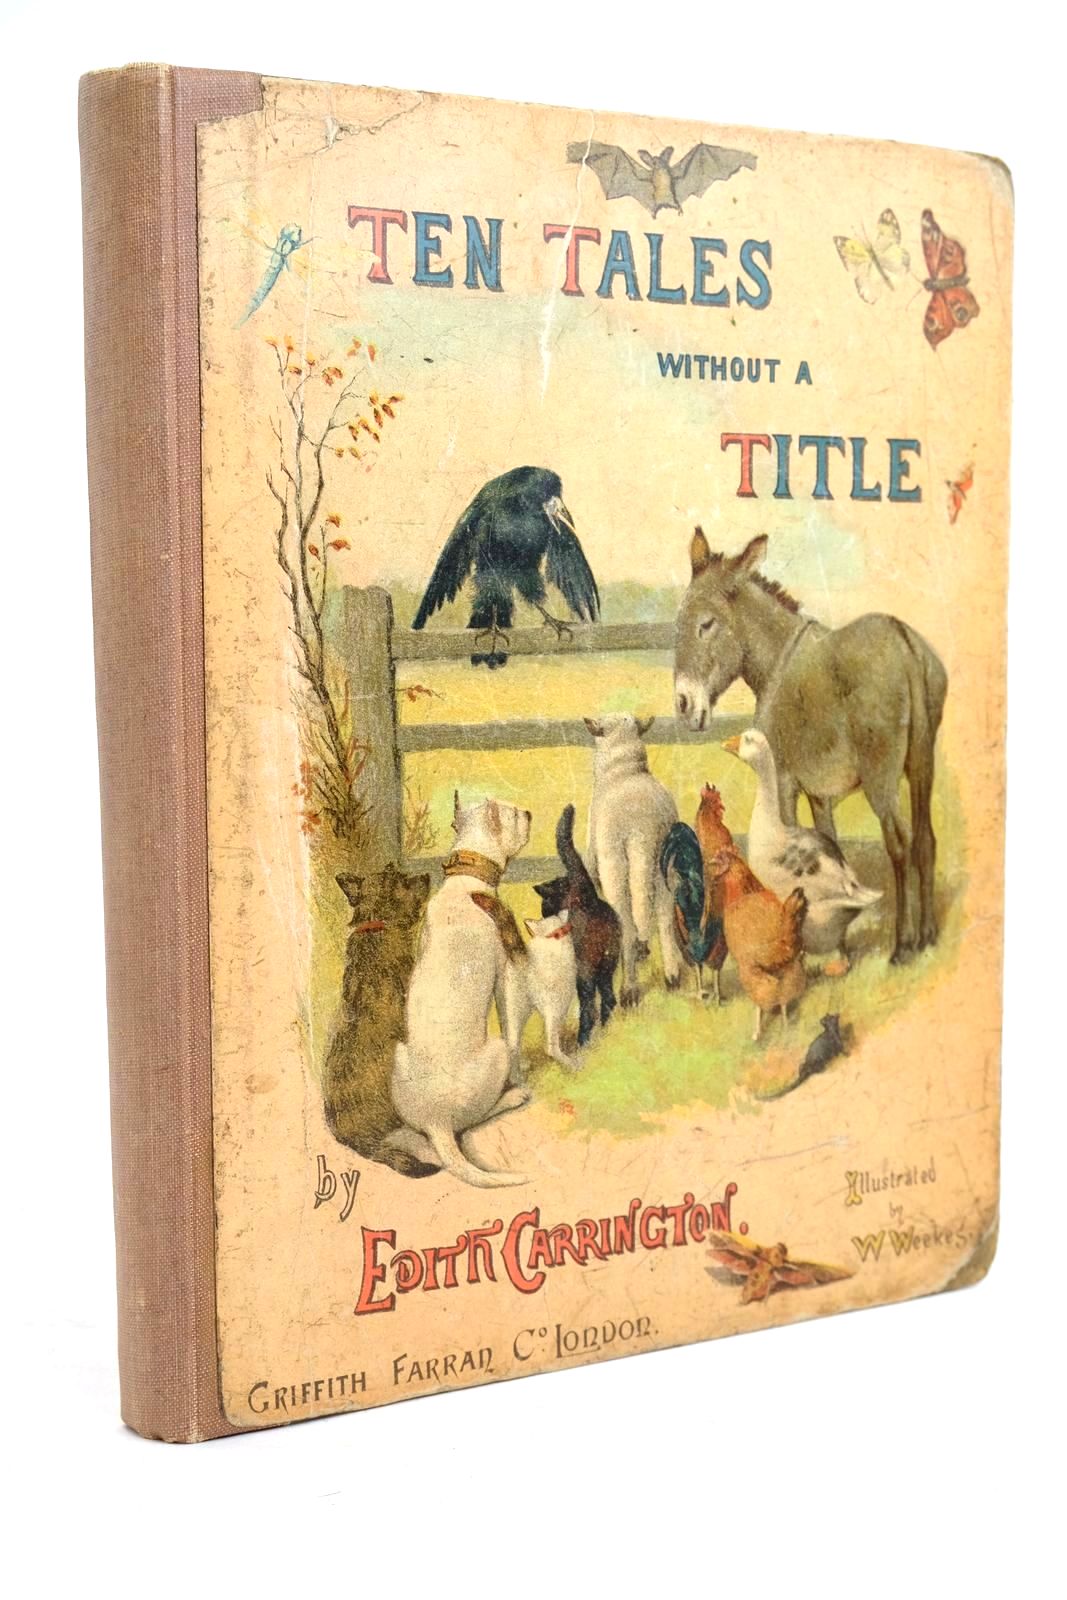 Photo of TEN TALES WITHOUT A TITLE written by Carrington, Edith illustrated by Weekes, W. published by Griffith Farran & Co. (STOCK CODE: 1320425)  for sale by Stella & Rose's Books